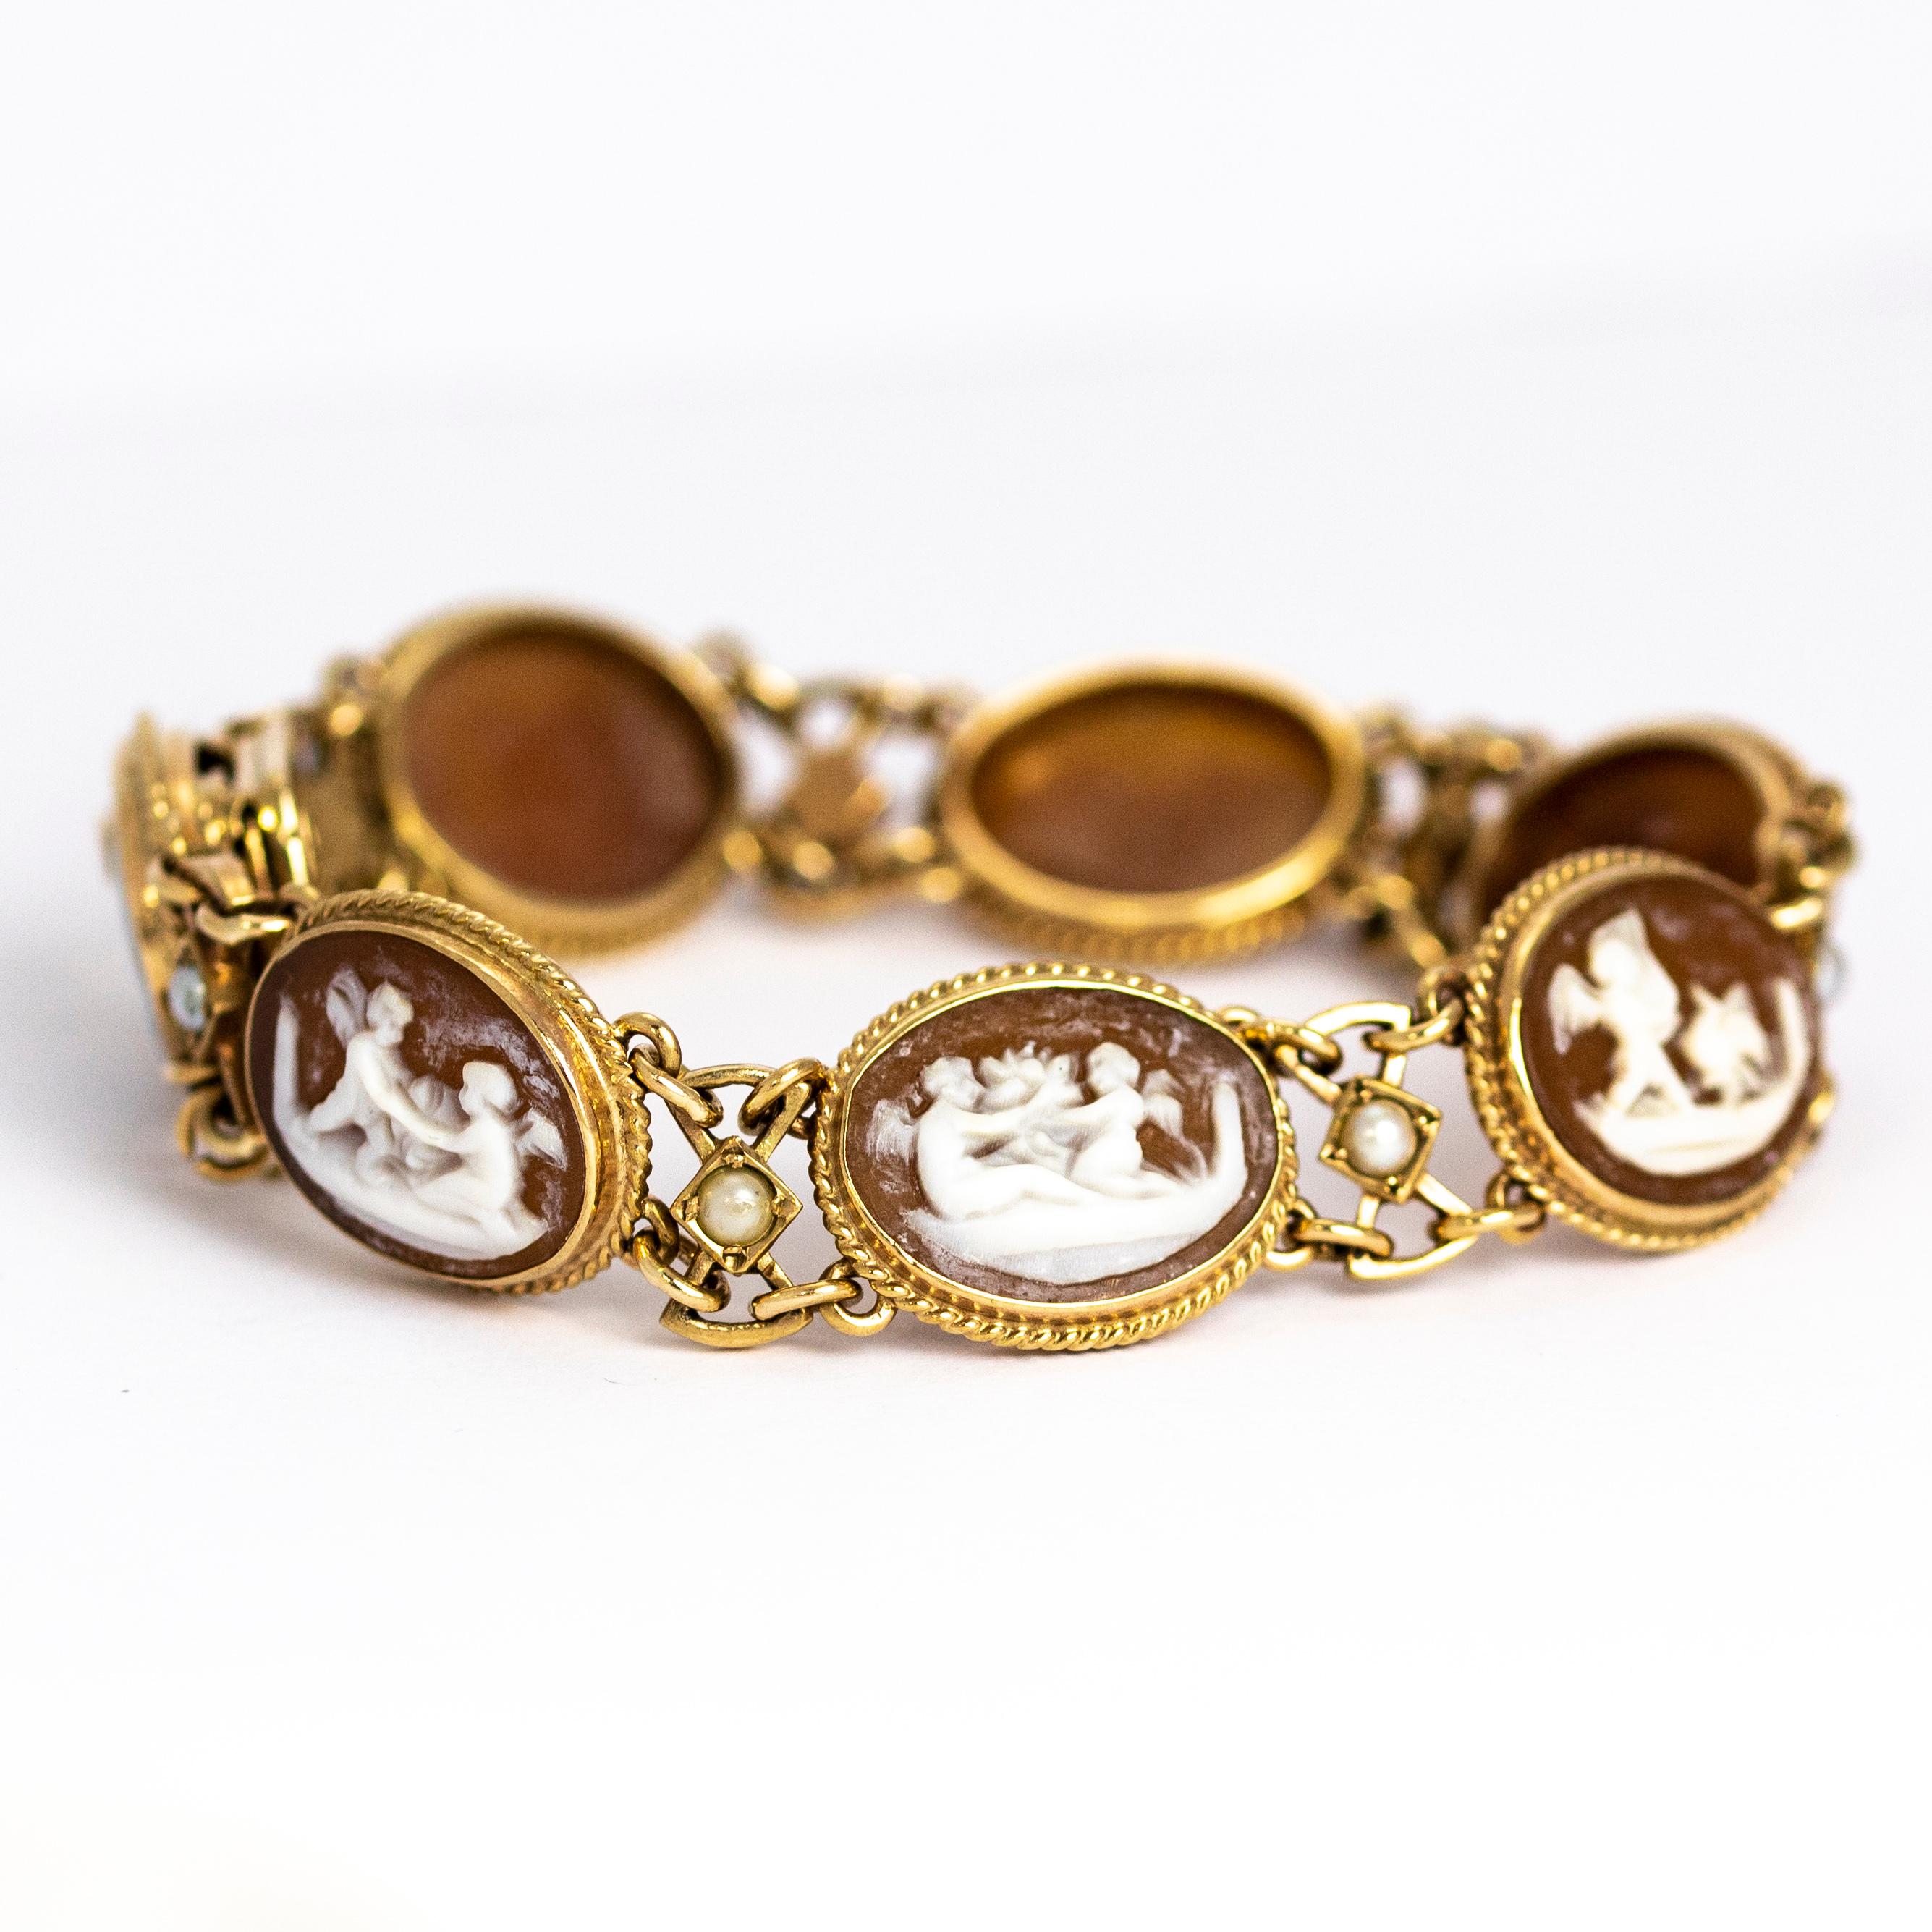 This sweet bracelet holds seven intricate scenes featuring cherubs and is beautifully carved out of shell. In between each scene a small pearl is held in a square setting on a decorative gold link. All modelled from 9ct gold and each link is